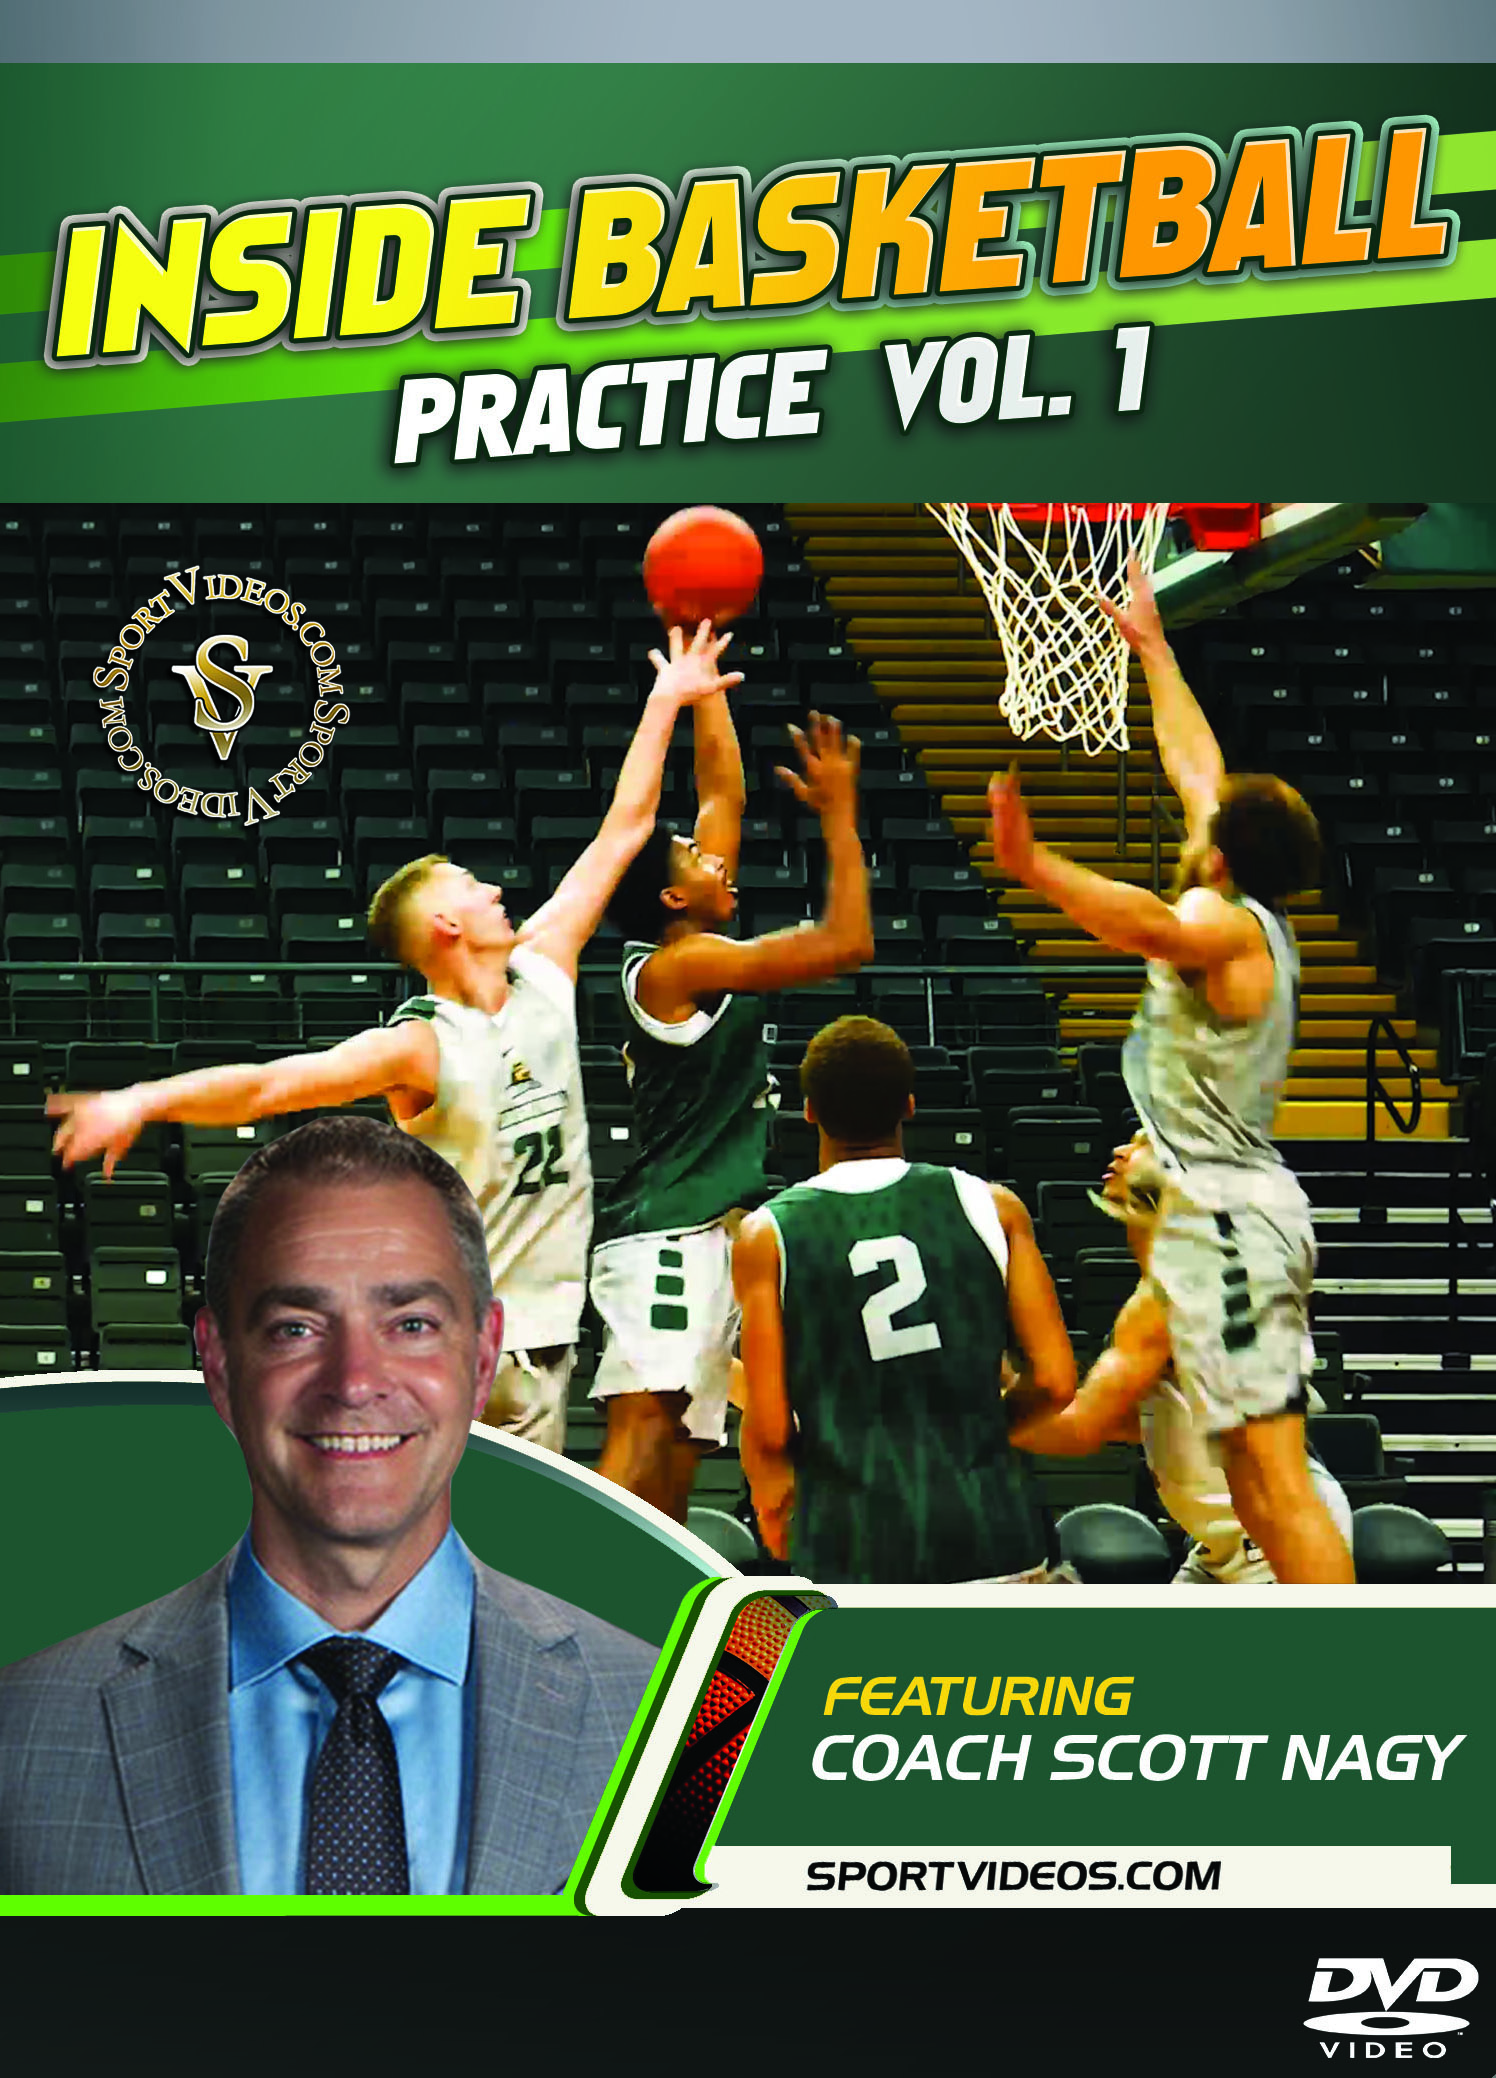 Inside Basketball Practice with Coach Scott Nagy Vol. 1 - DVD or Download - Free Shipping